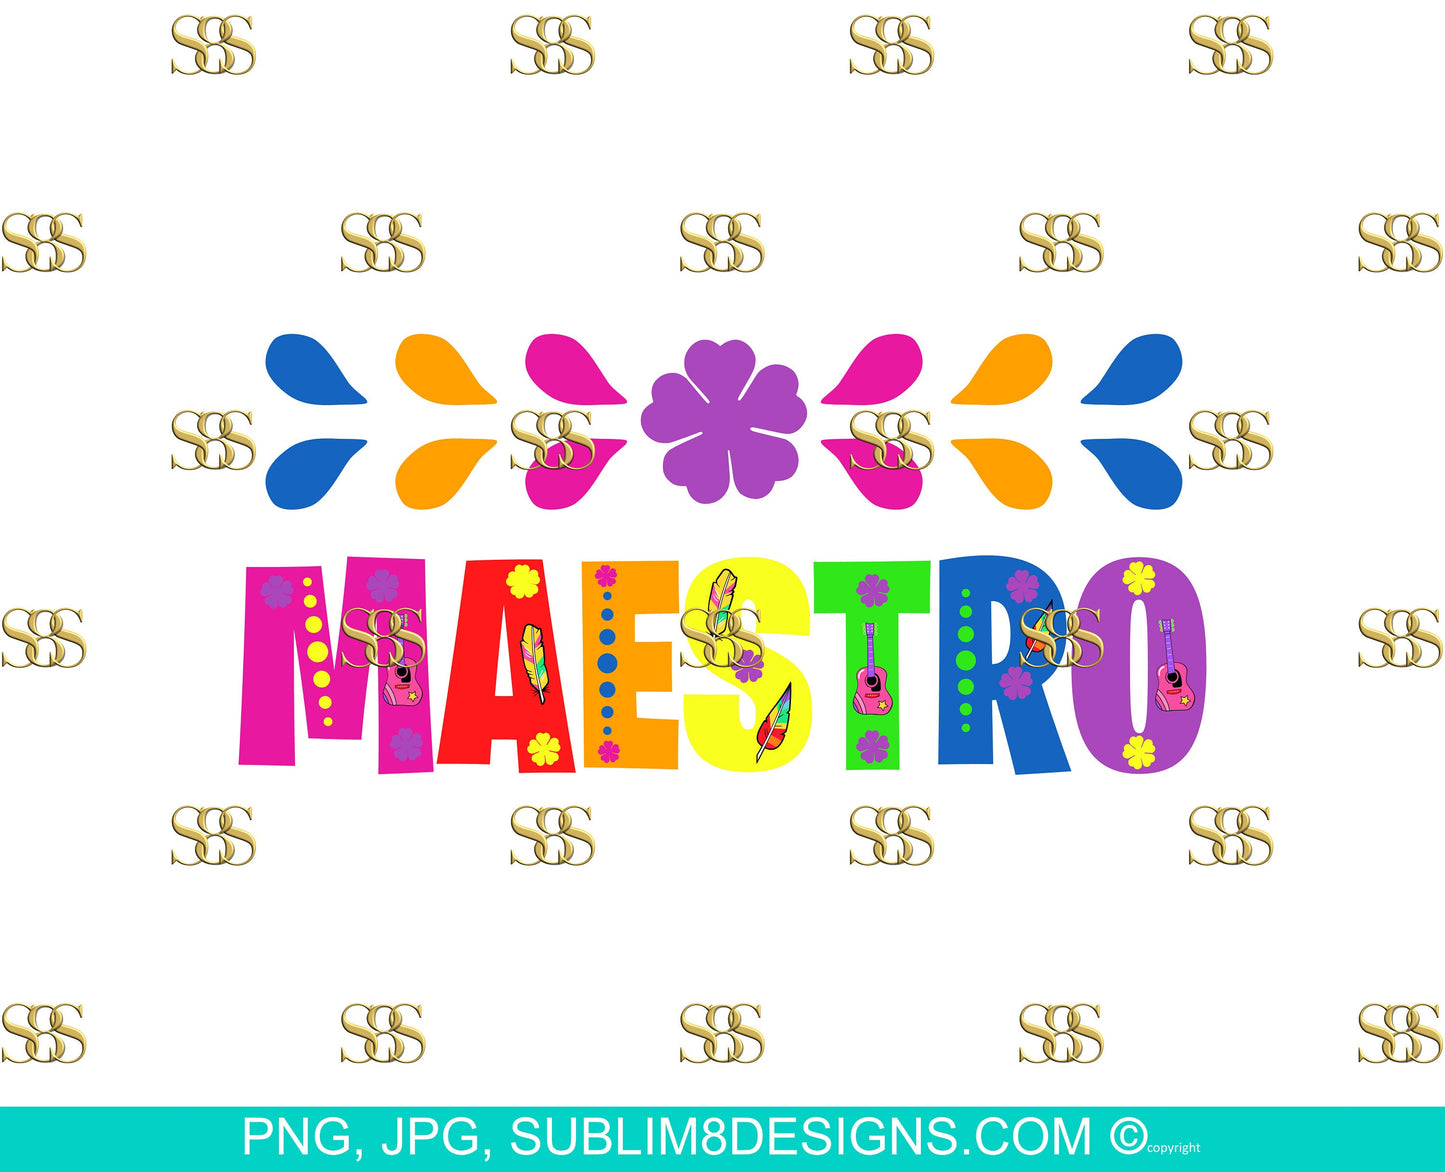 Maestro Colorful Teacher Sublimation Design PNG and JPG ONLY